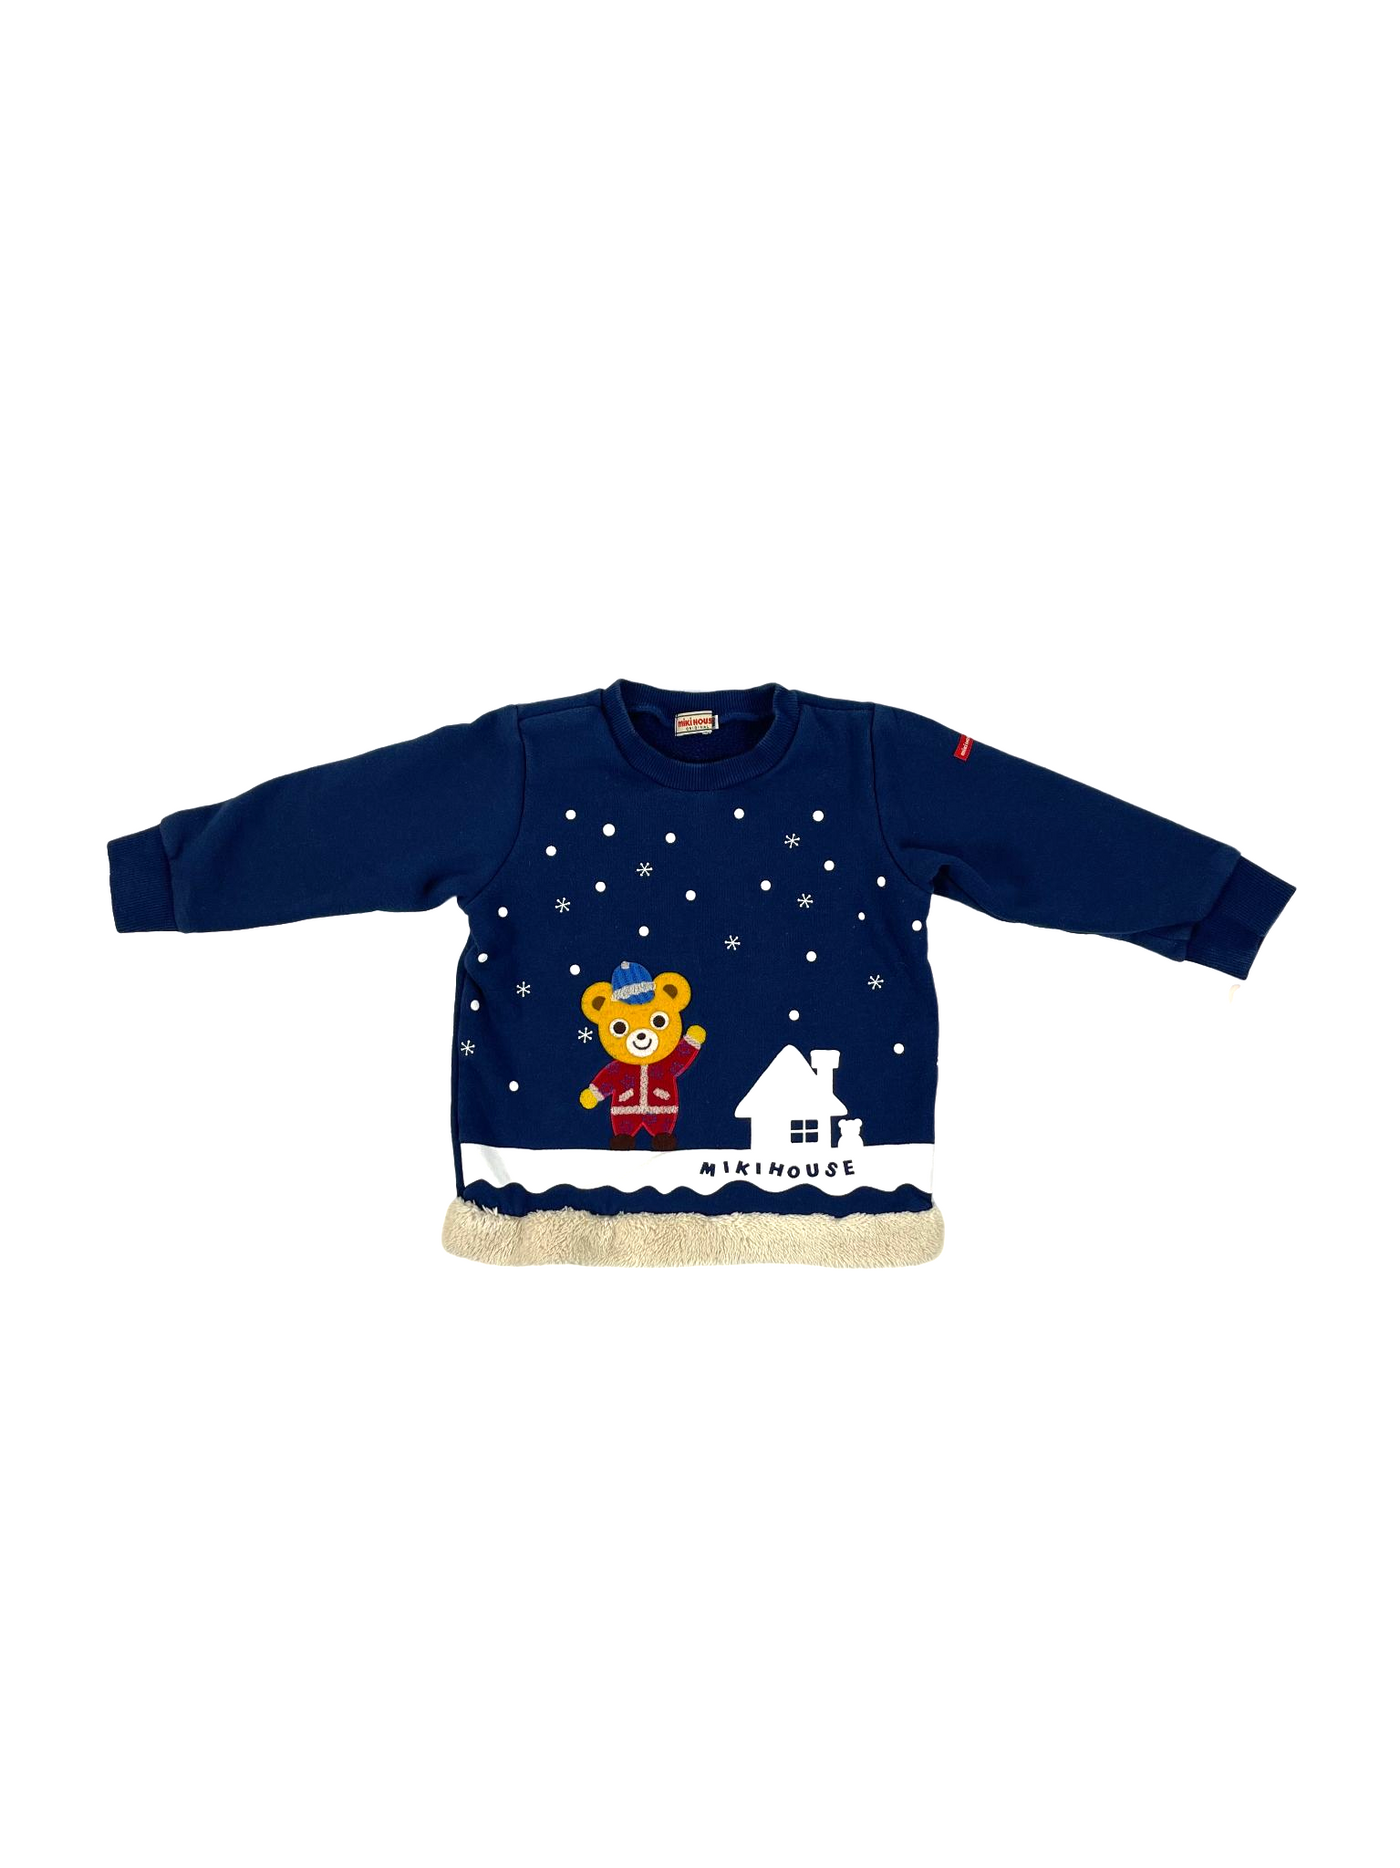 Mikihouse Sweater (2Y)